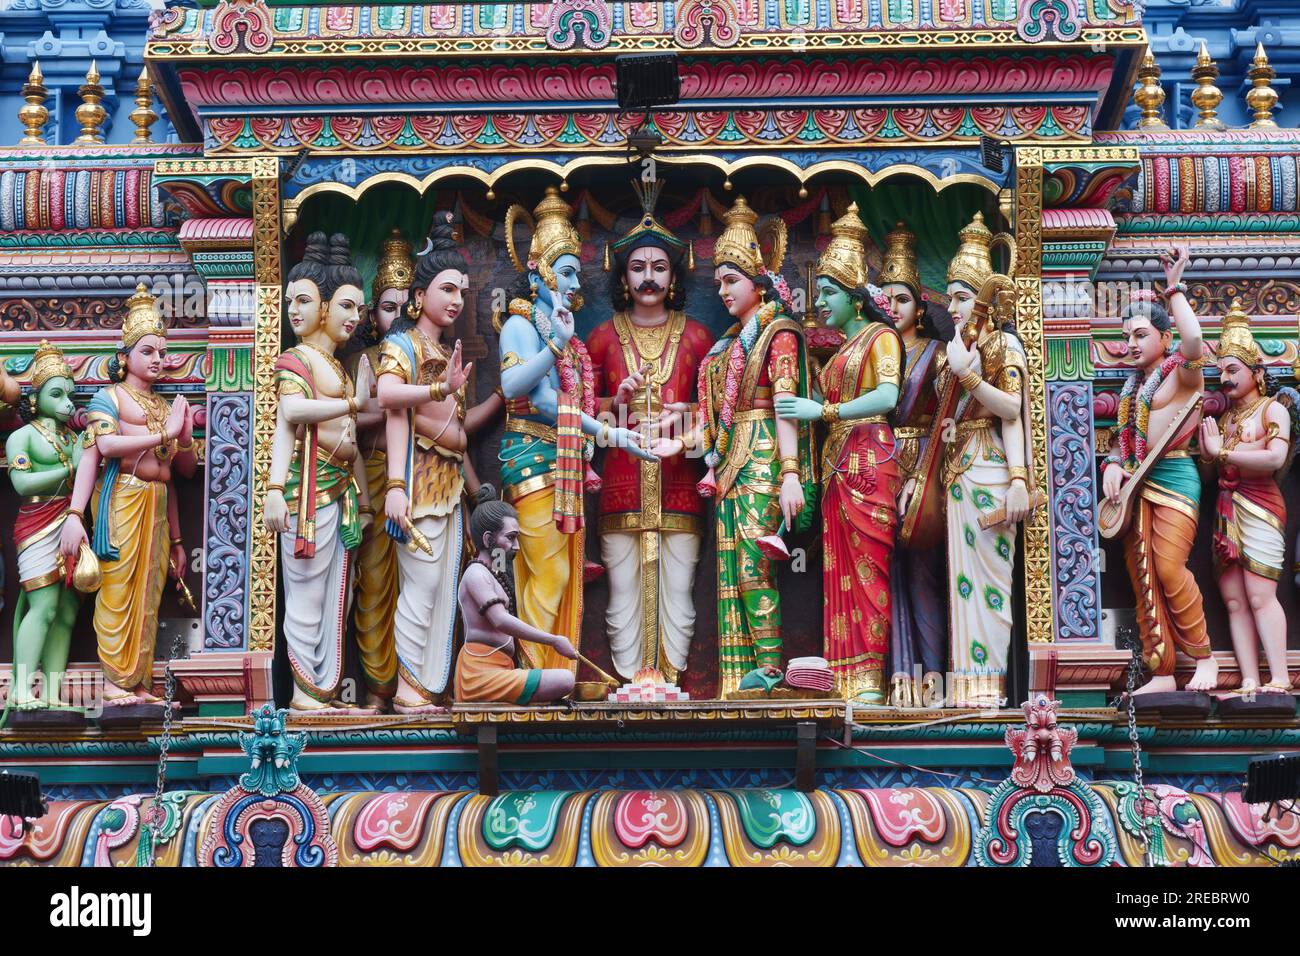 A multitude of godly and mythical figures decorating the entrance of Sri Krishnan Temple in Waterloo St., Bugis, Singapore Stock Photo